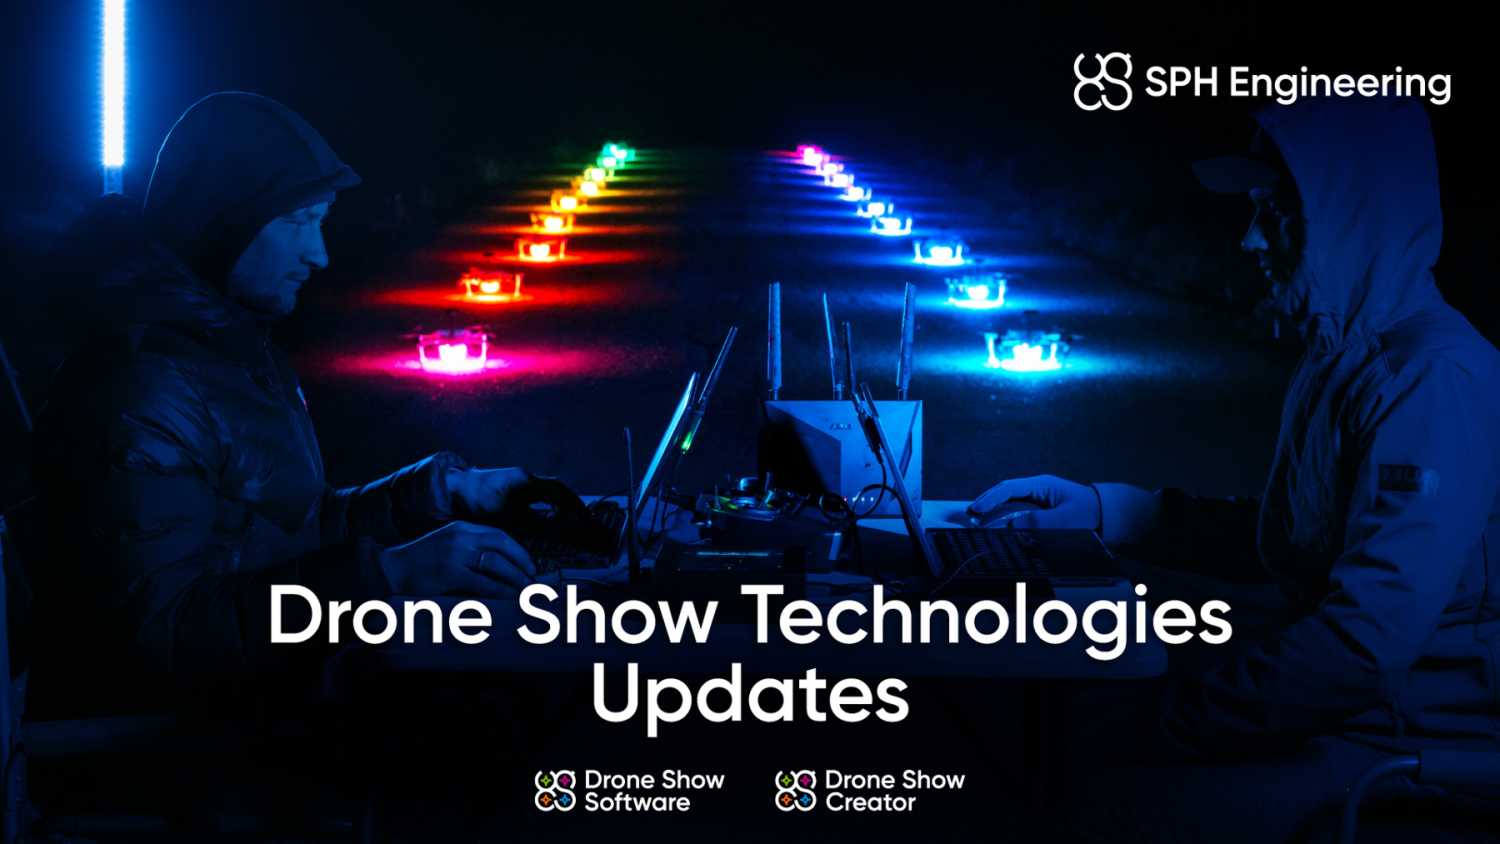 ‘These updates bring an array of powerful features that will elevate the world of drone shows’